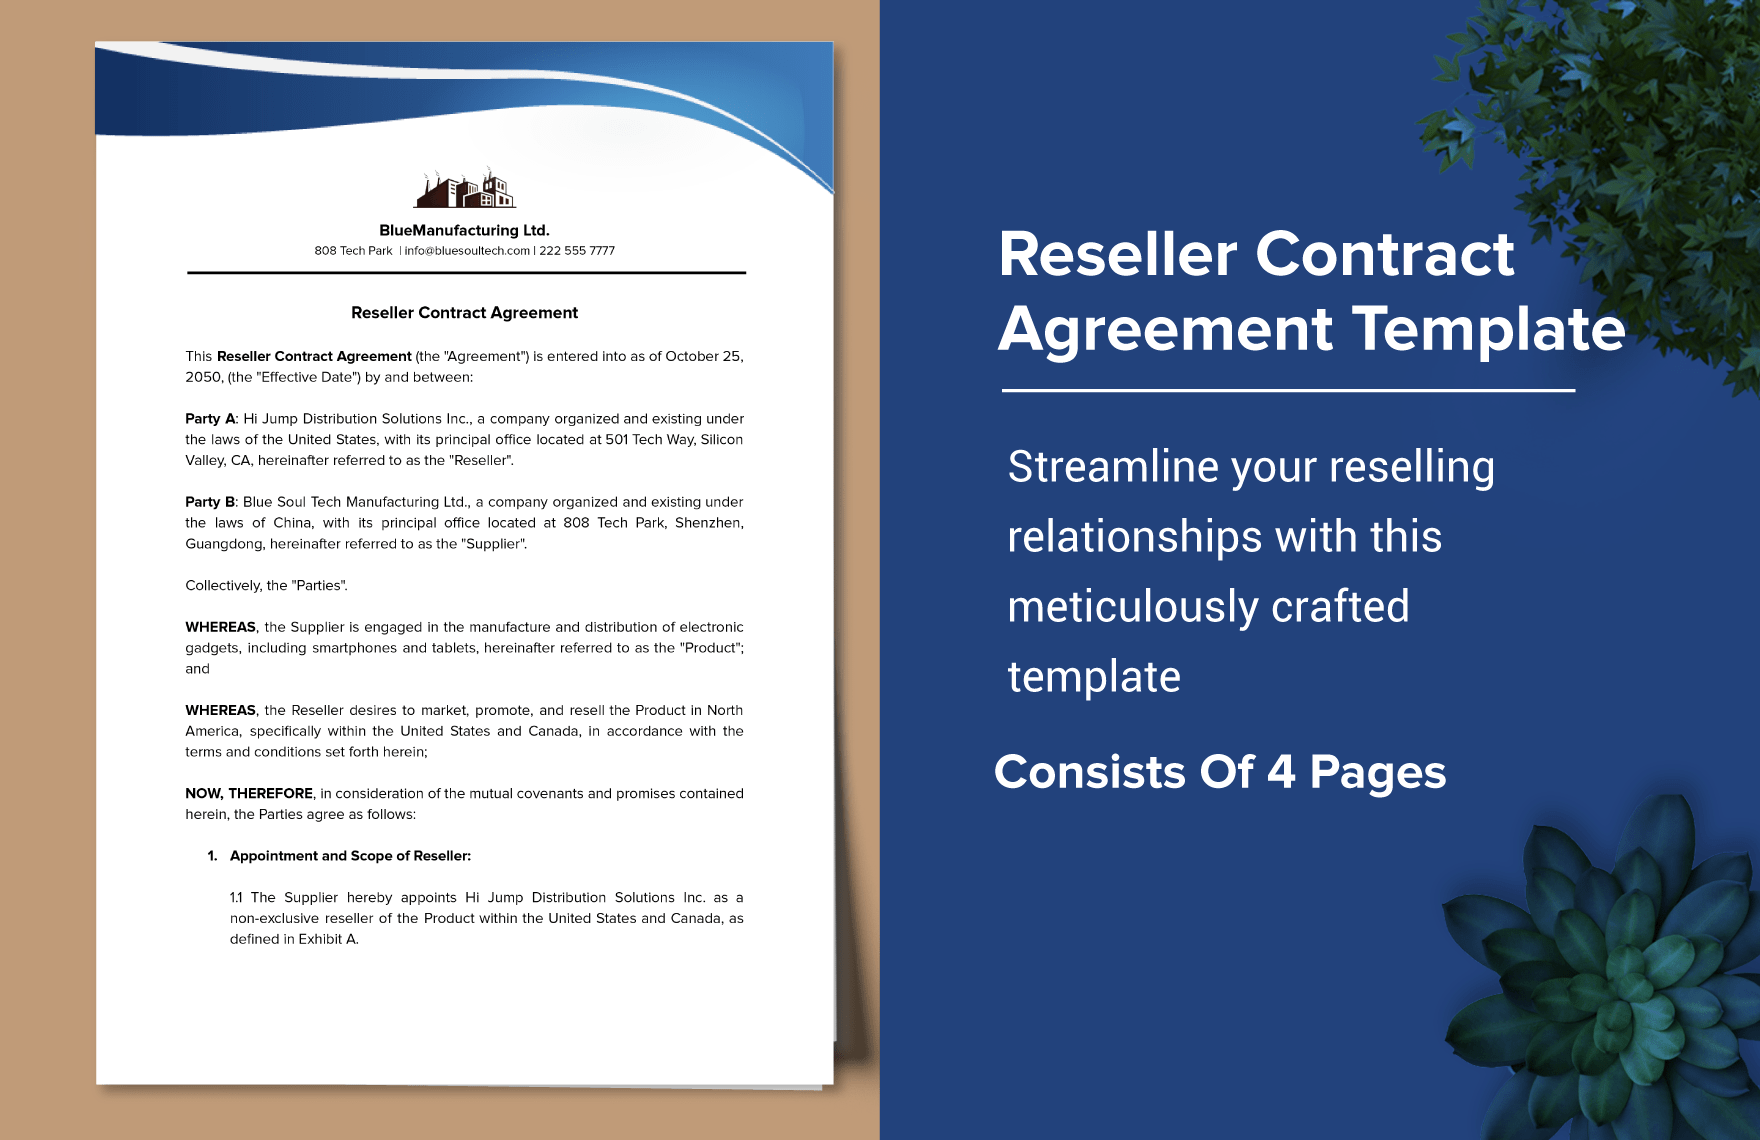 Reseller Contract Agreement Template